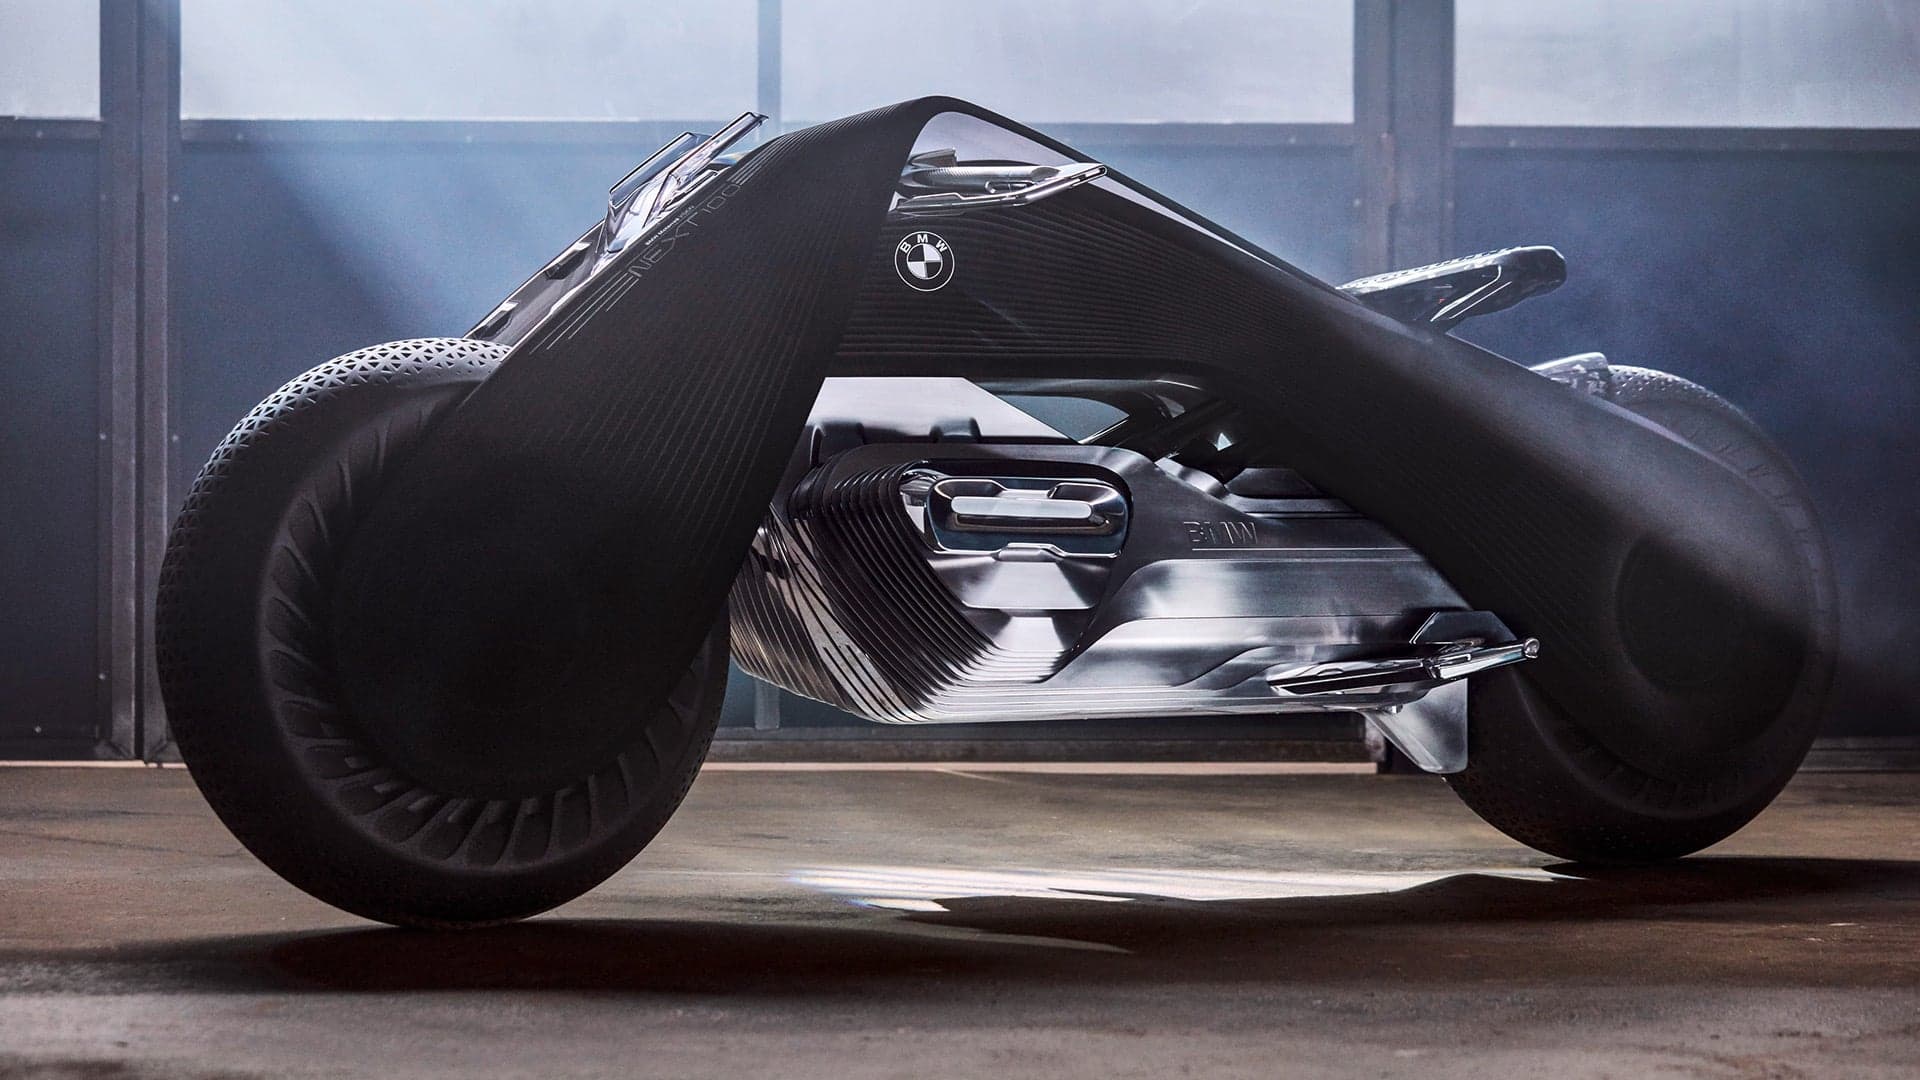 BMW’s Shapeshifting, Crash-Proof Motorcycle Is the Future Of Two-Wheeled Mobility